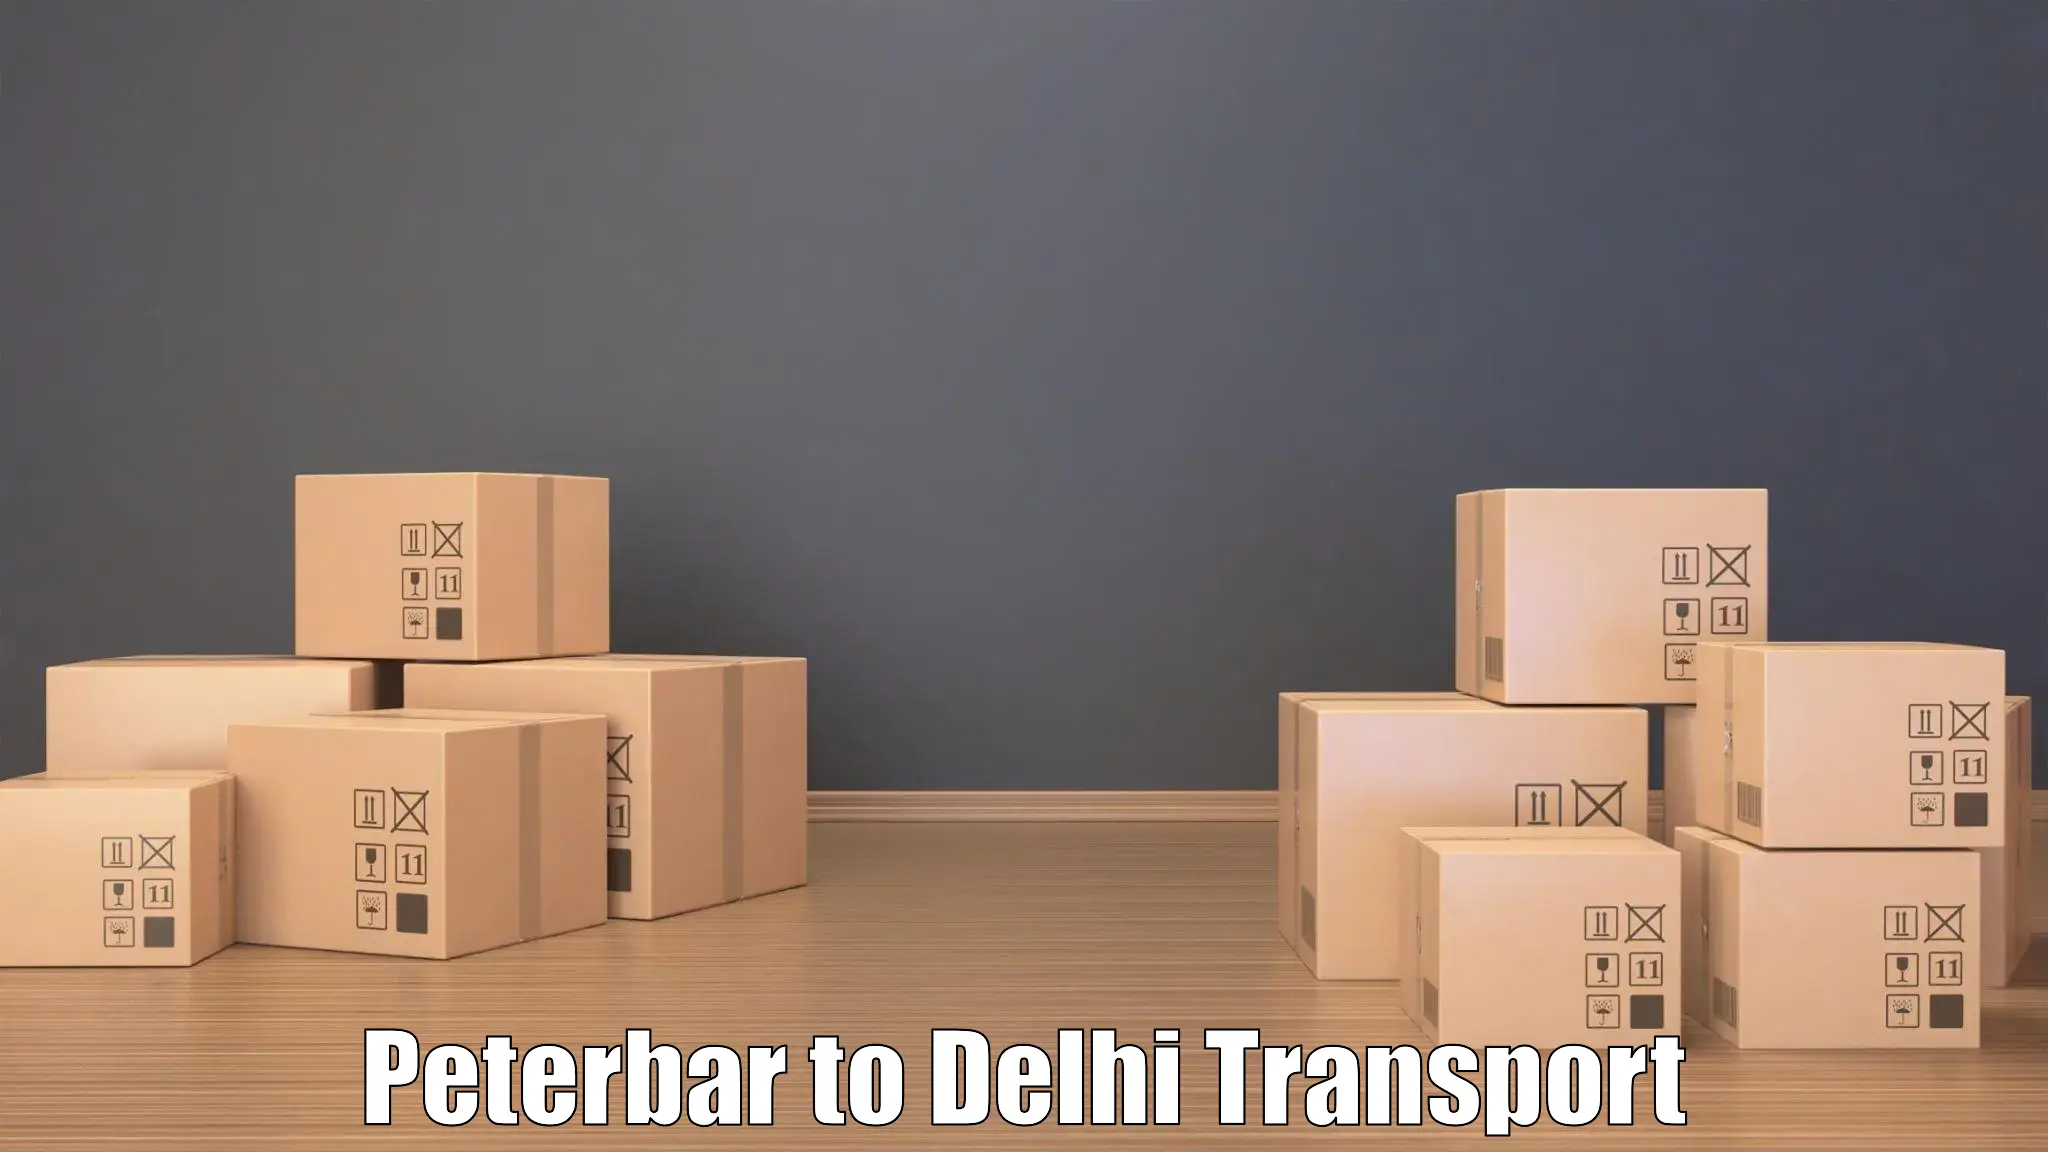 Two wheeler transport services Peterbar to University of Delhi